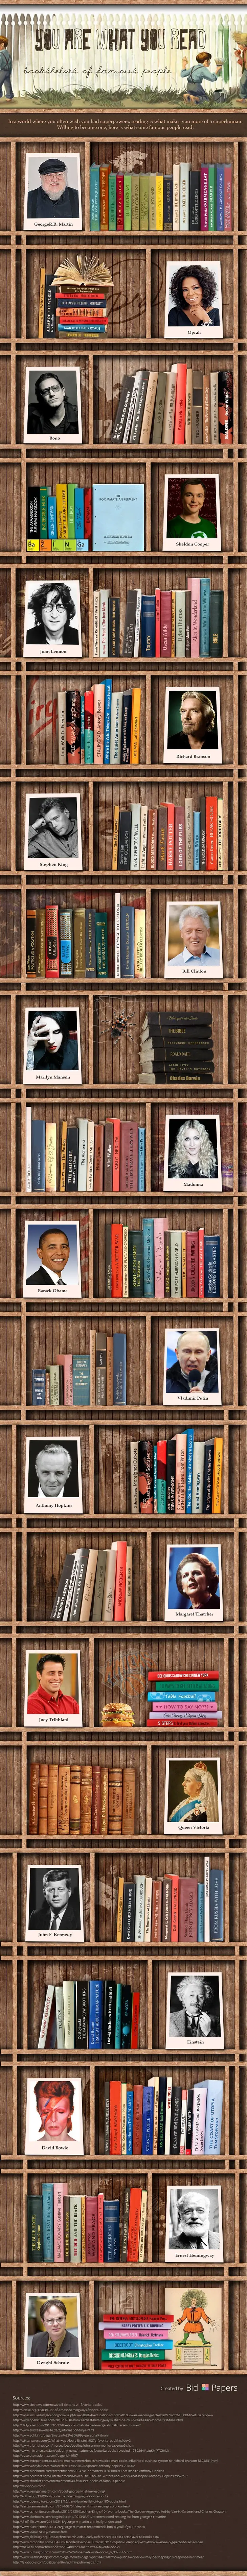 you-are-what-you-read-bookshelves-of-famous-people-min.jpg